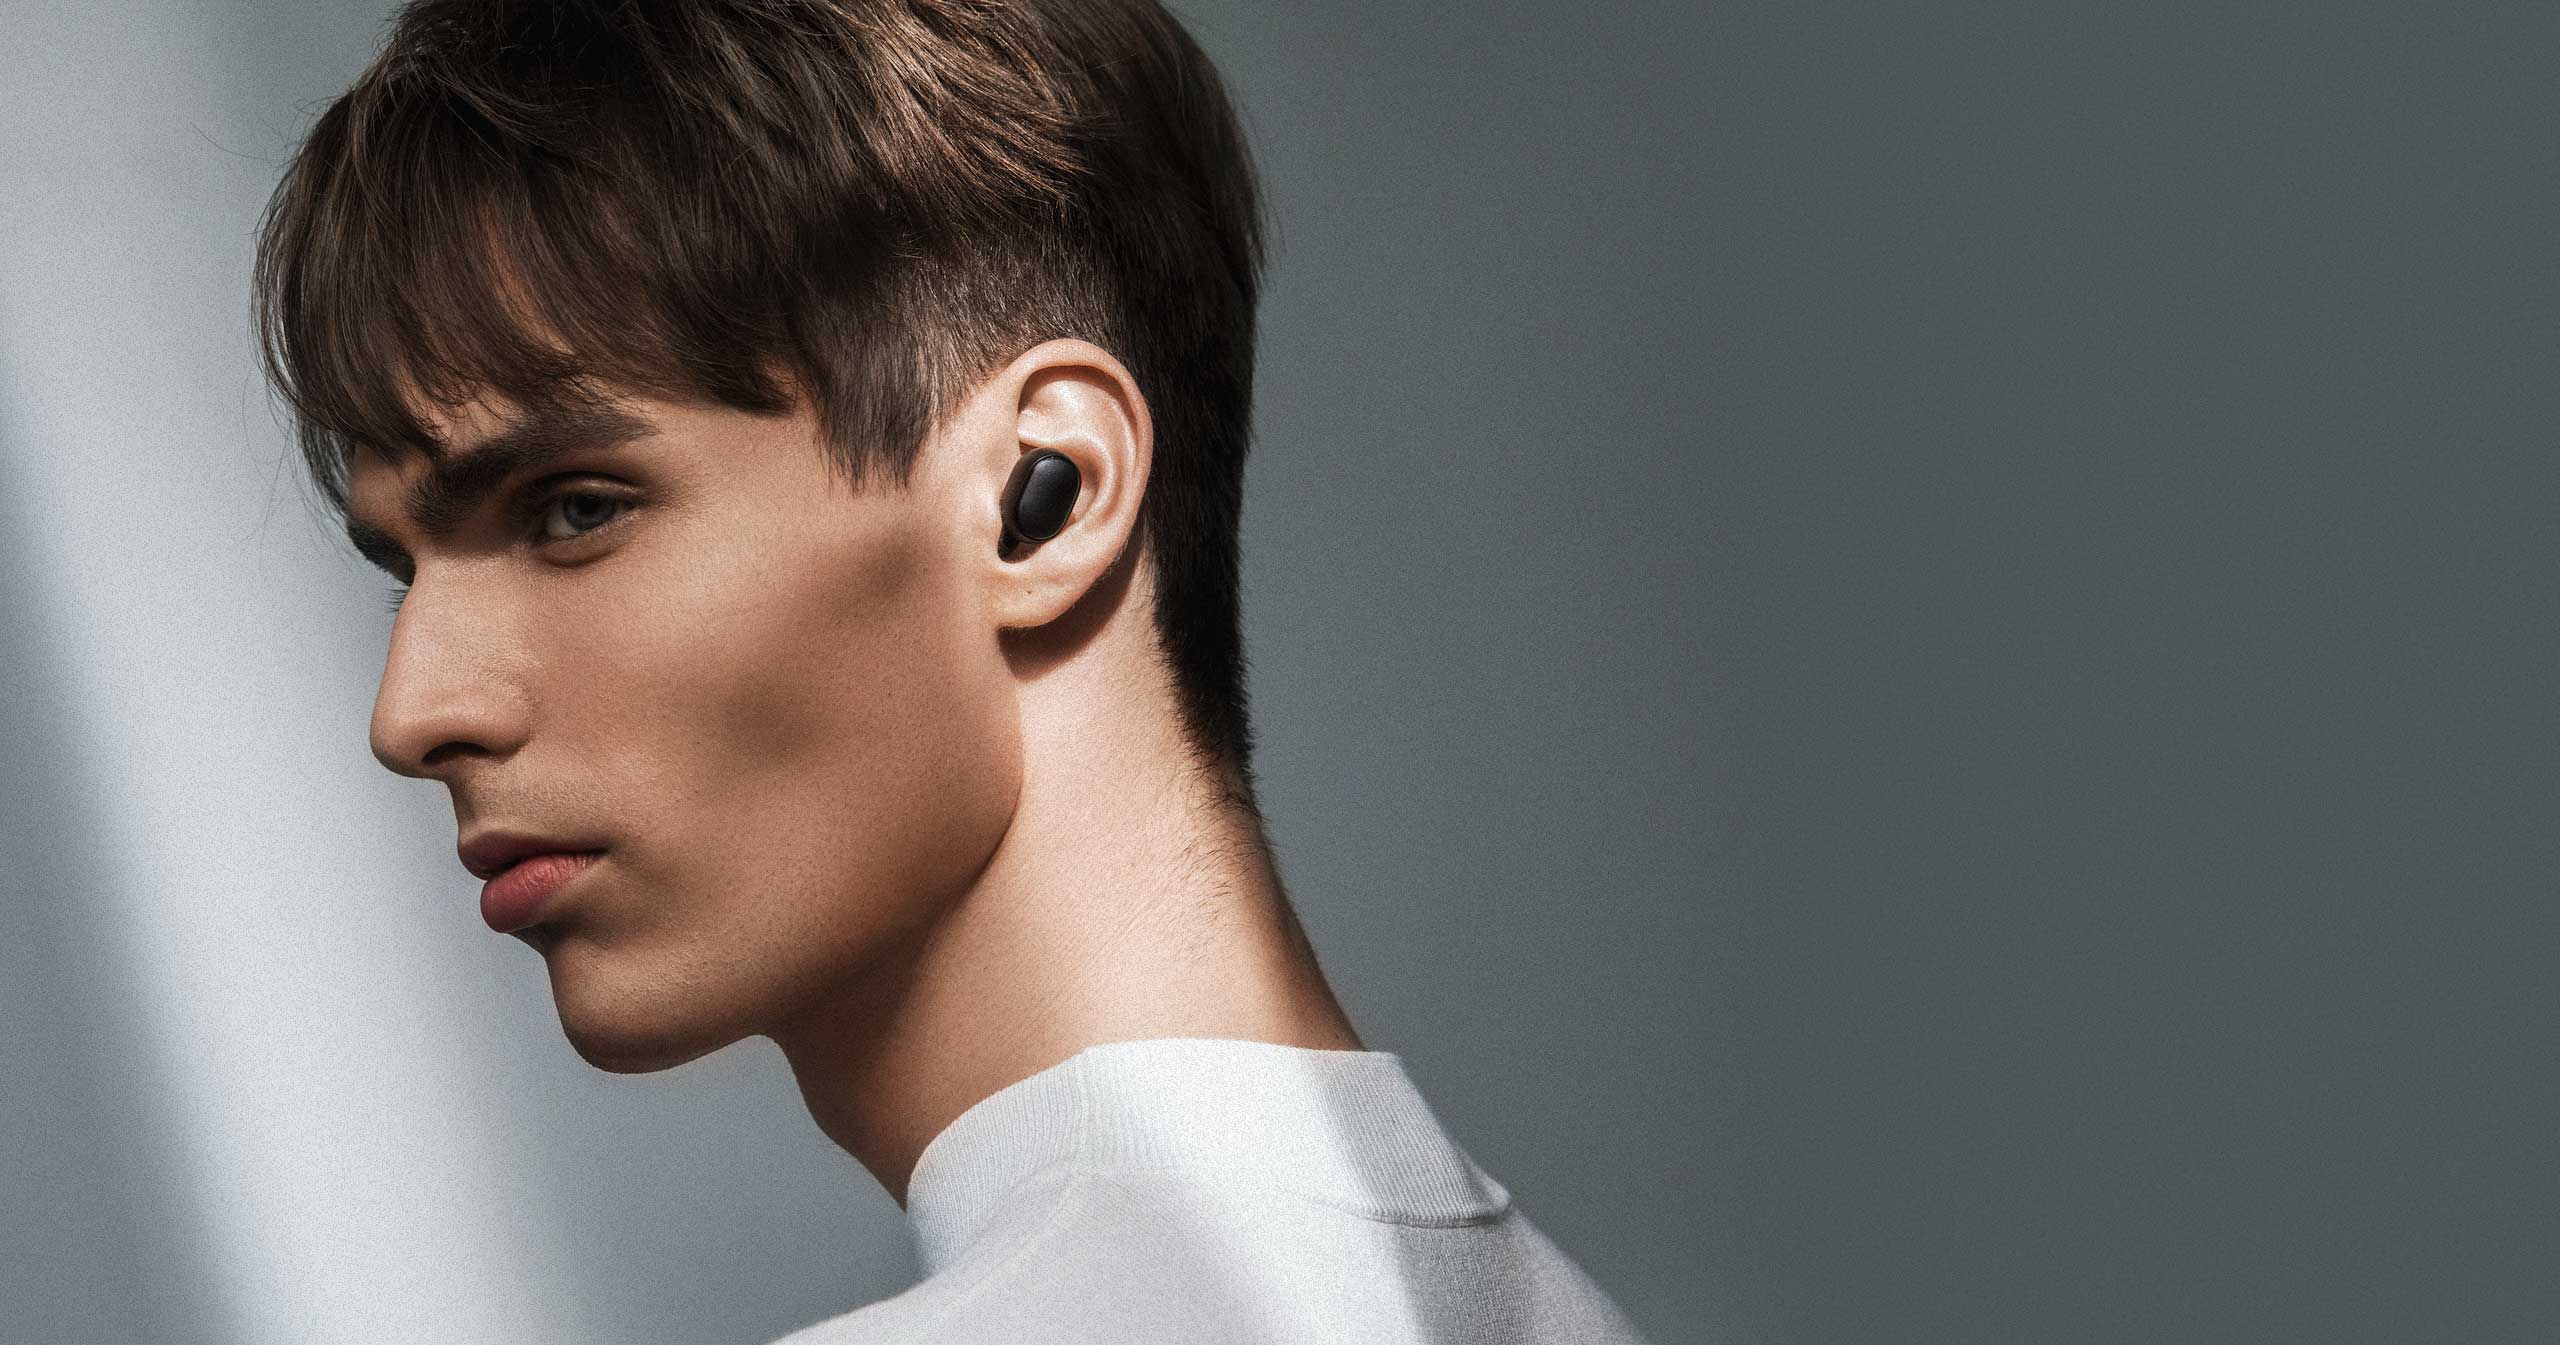 Xiaomi launches 3 wireless earbuds including an AirPods clone. Priced